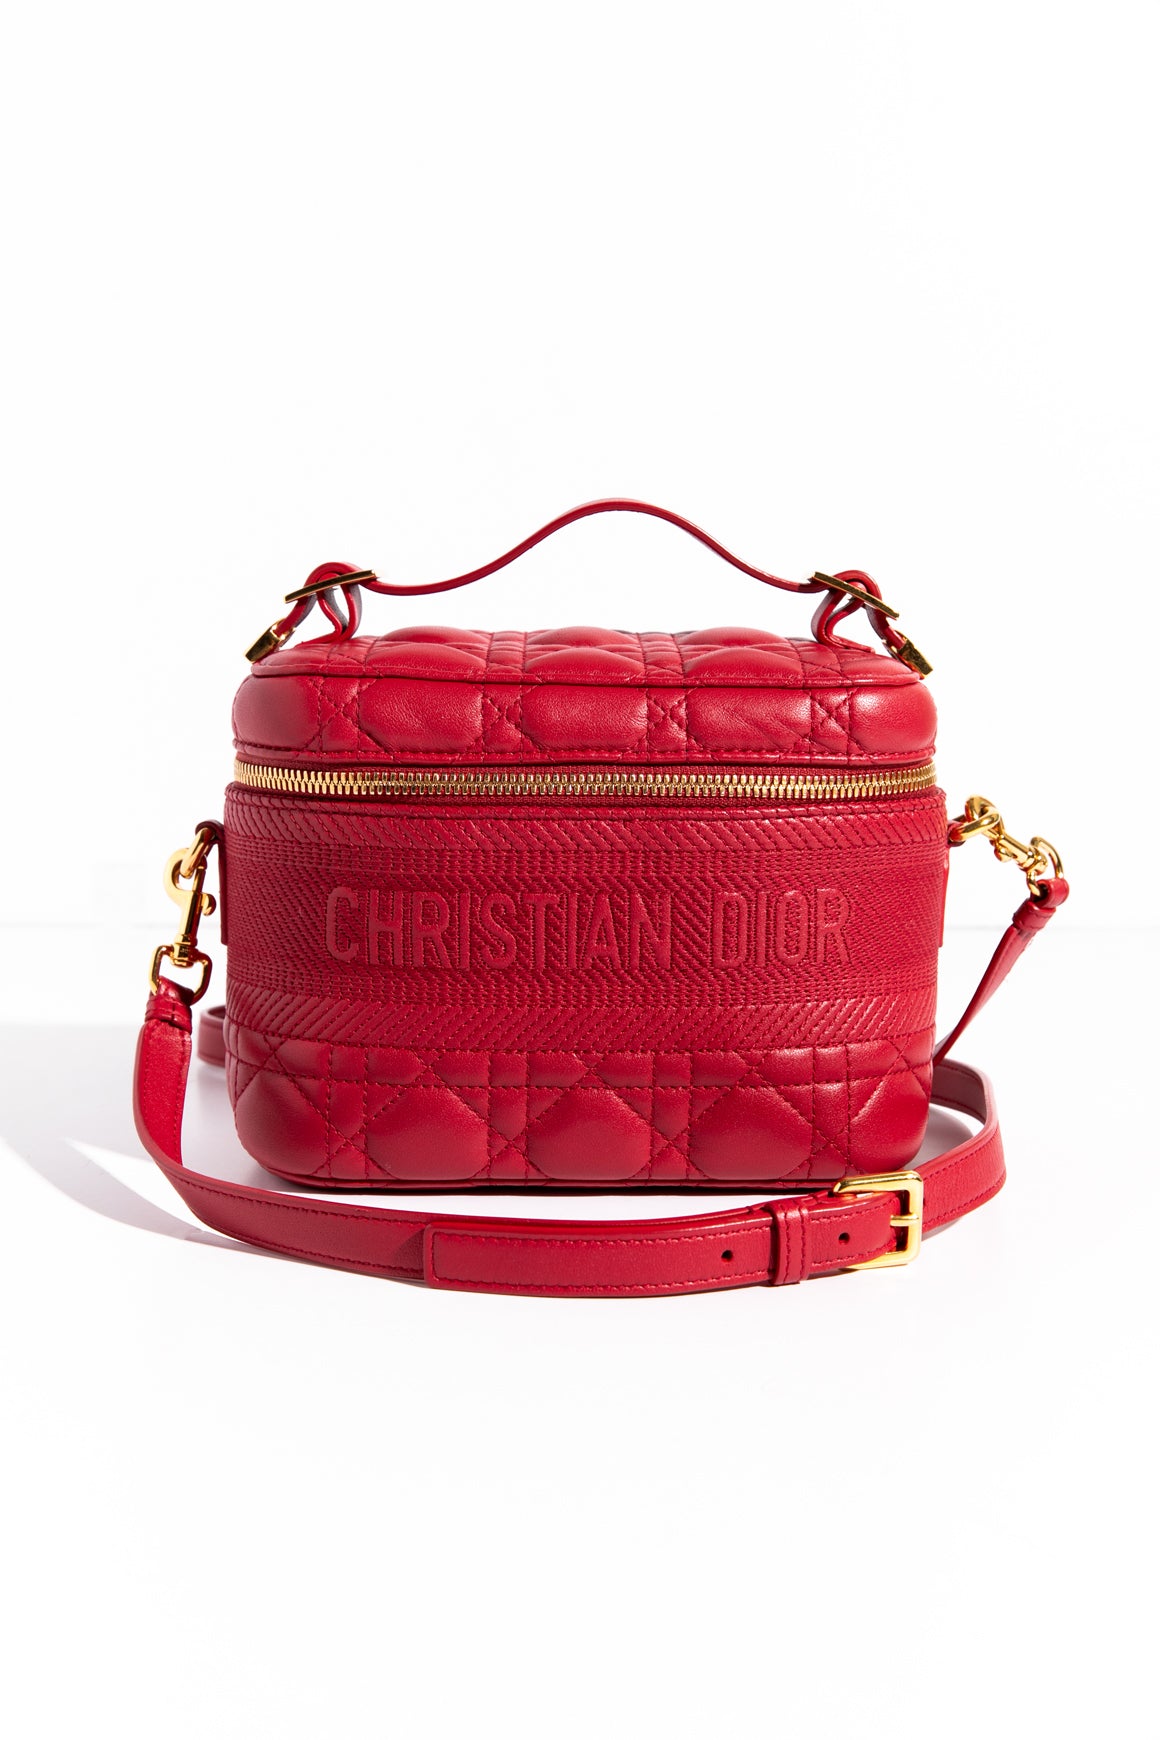 CHRISTIAN DIOR Red Cannage Micro Vanity Bag